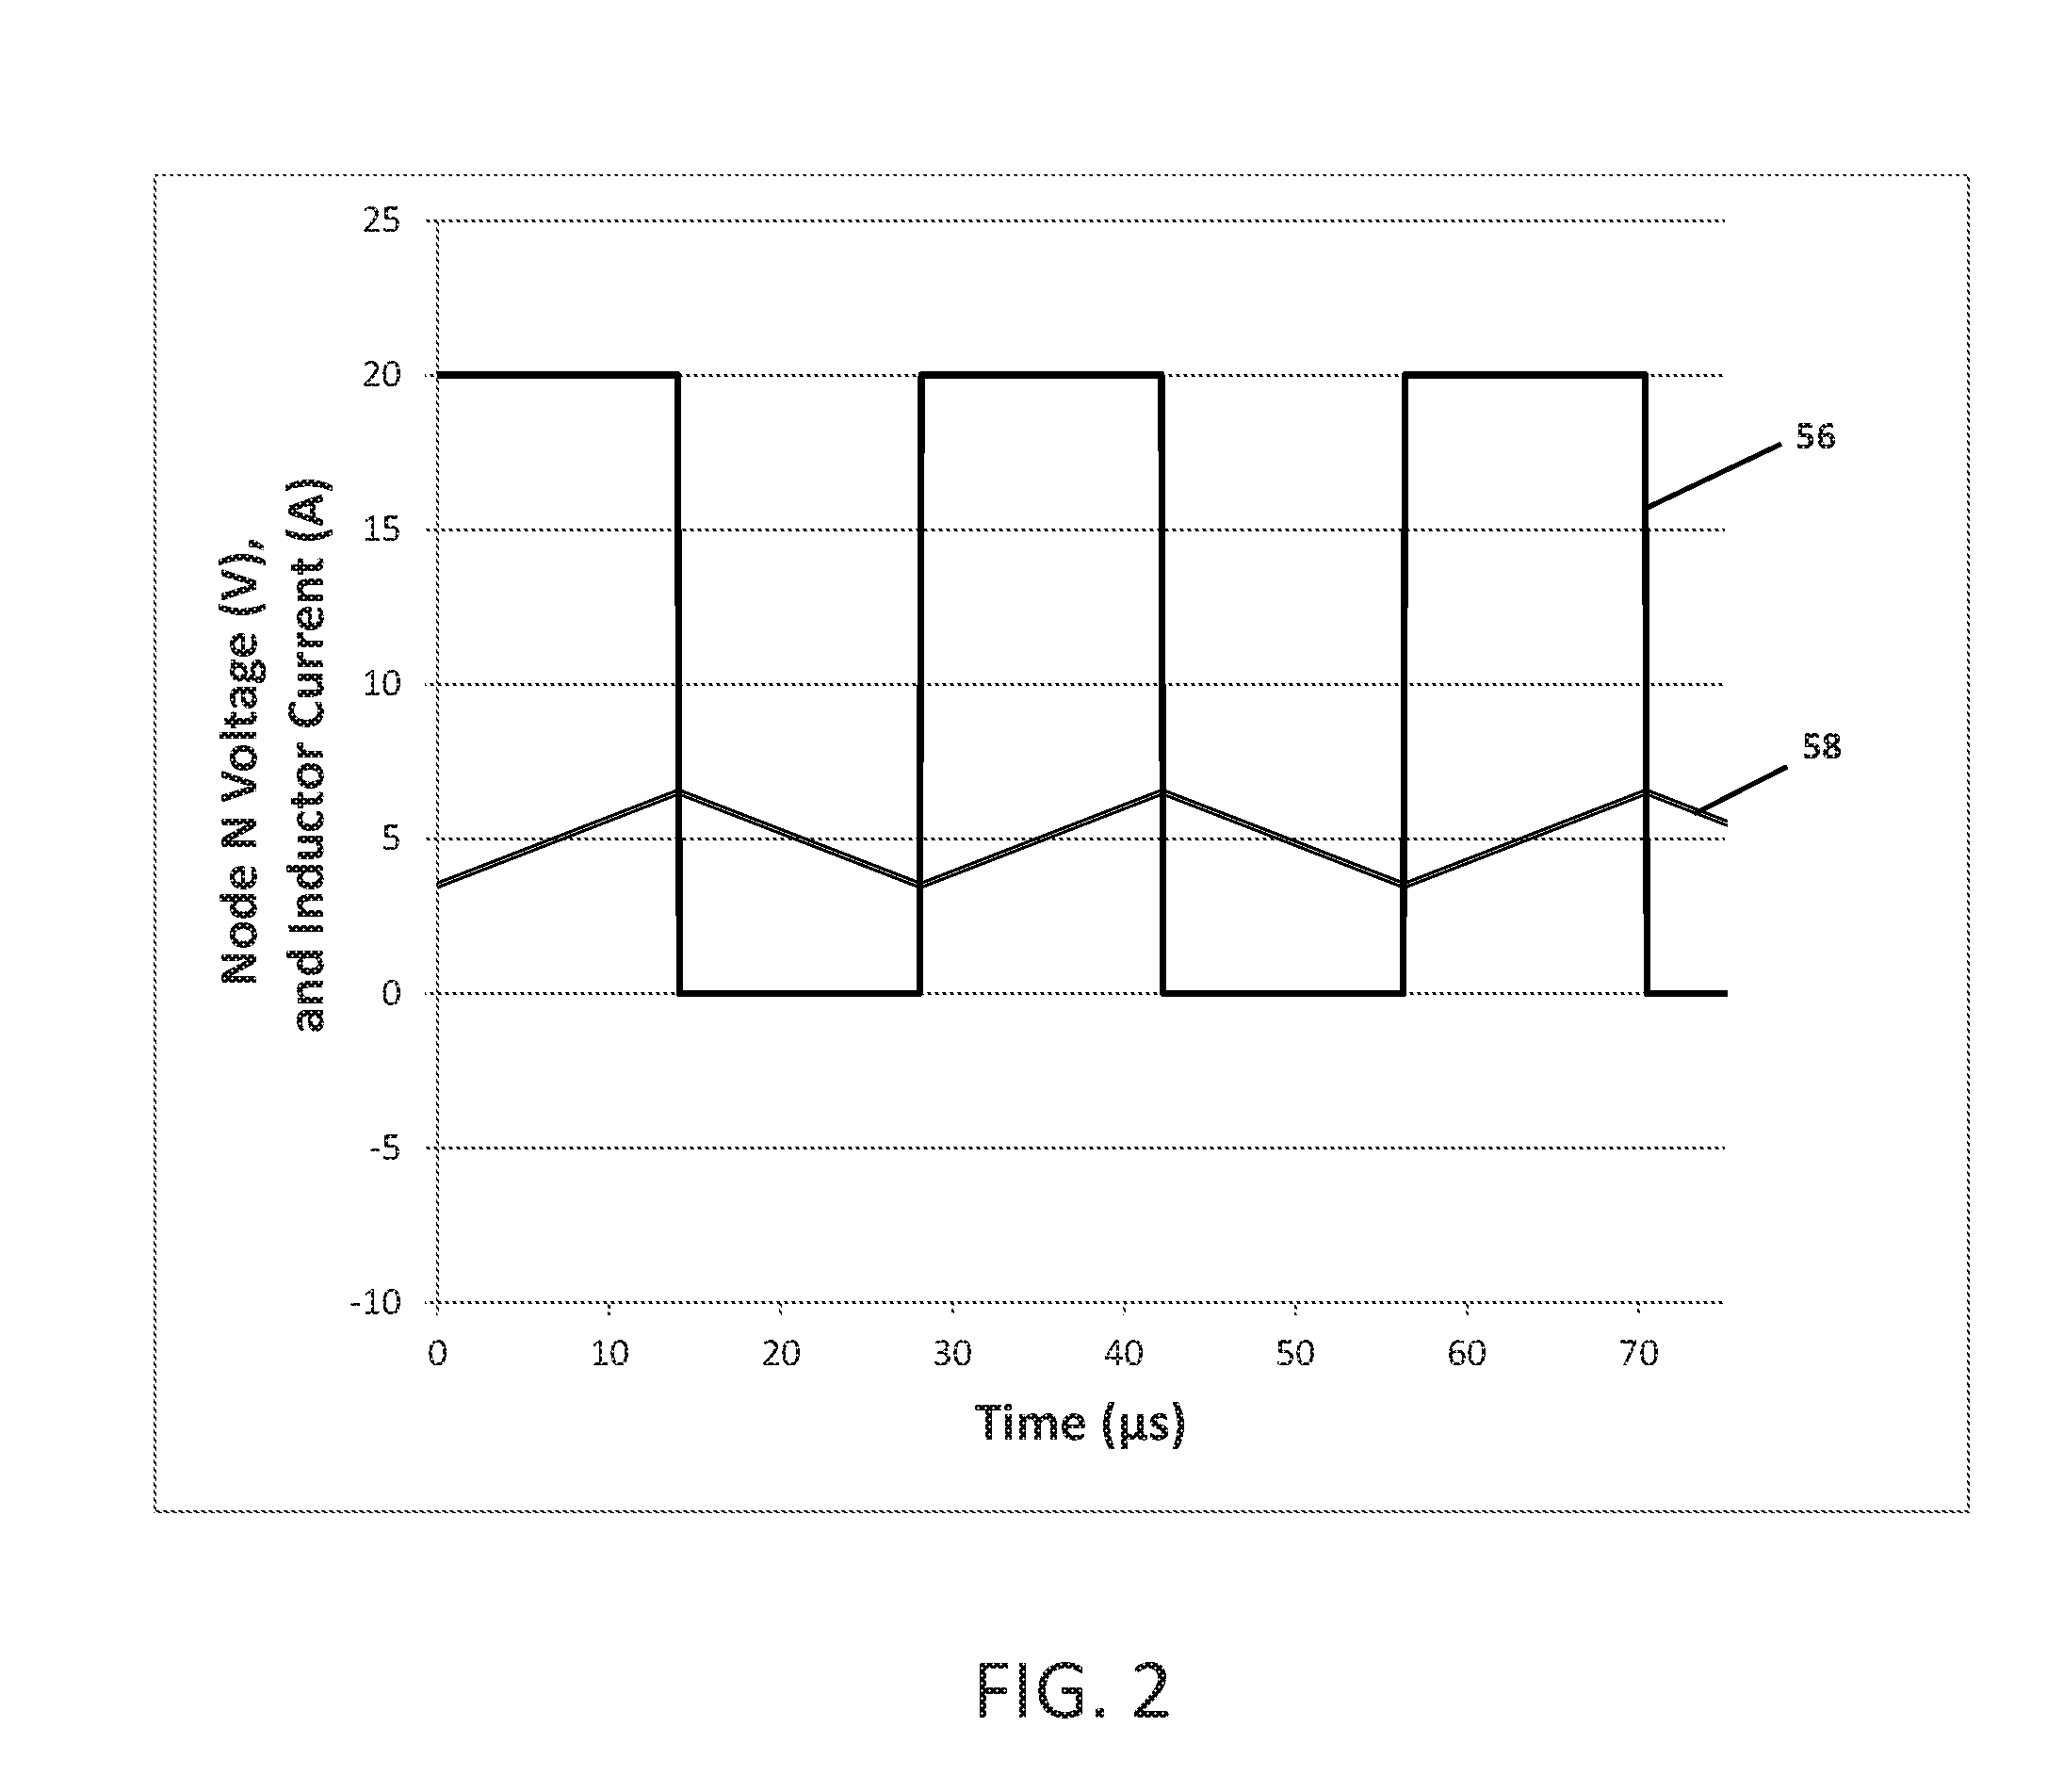 Low loss current sensor and power converter using the same